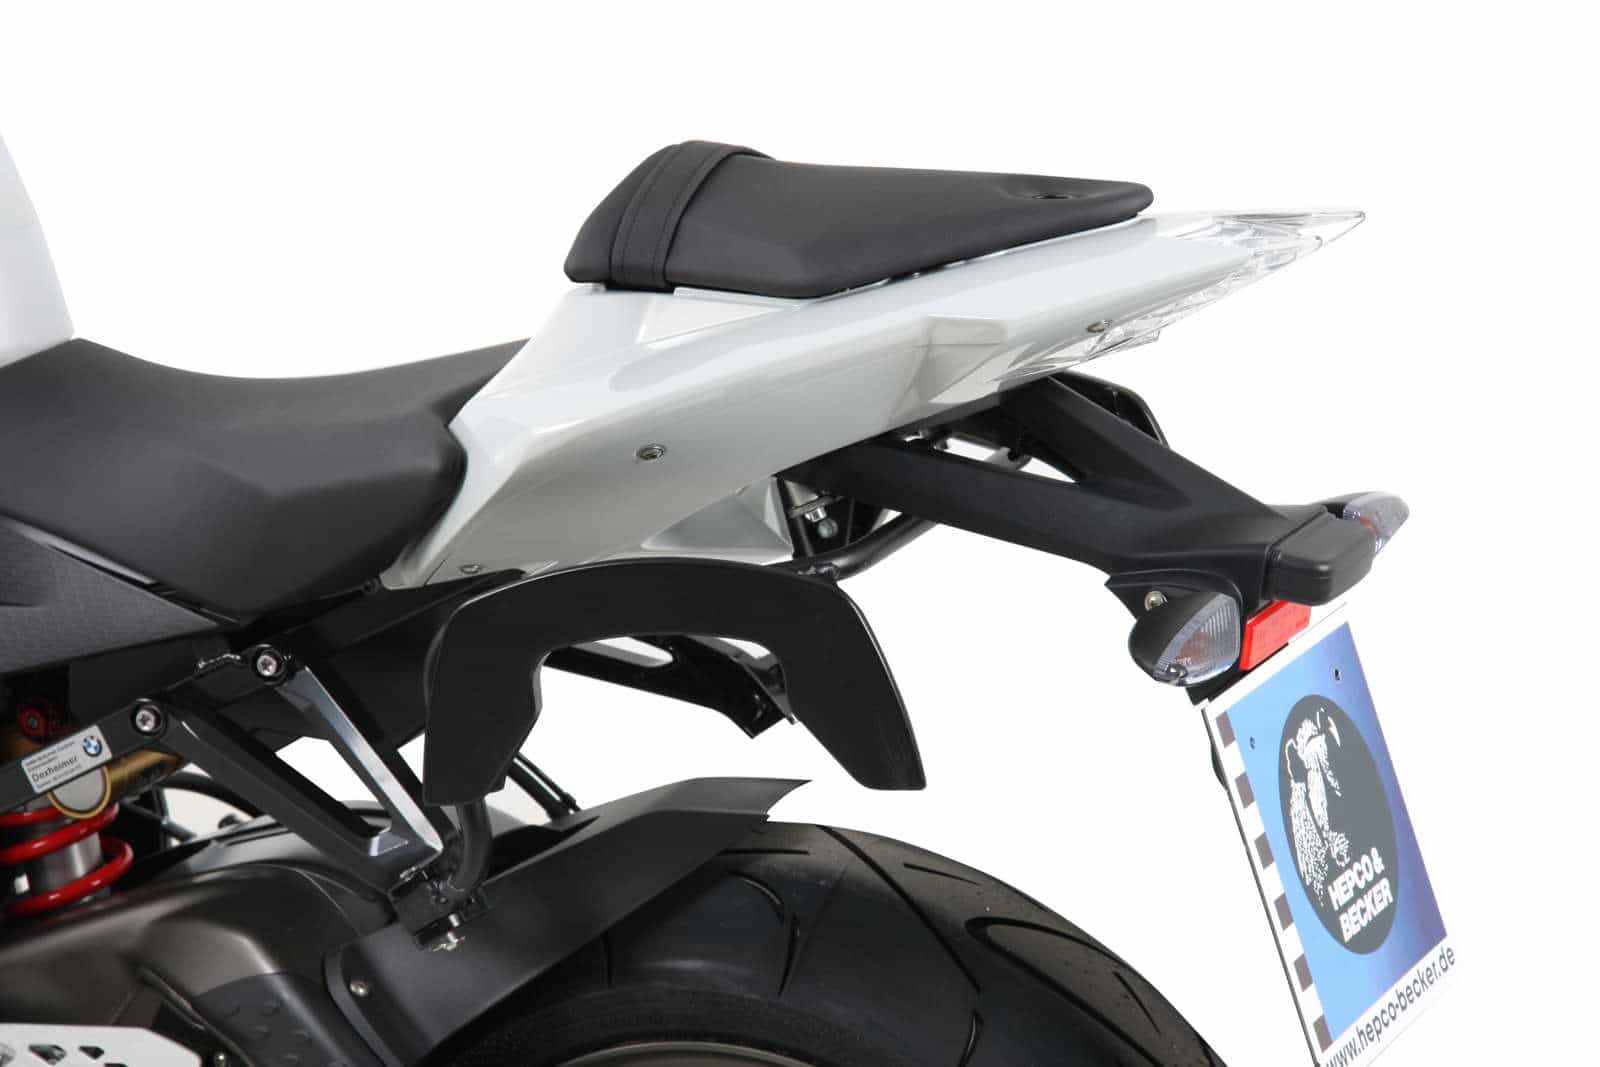 C-Bow sidecarrier for BMW S 1000 RR (2012-2015) (pillion seat not usable)